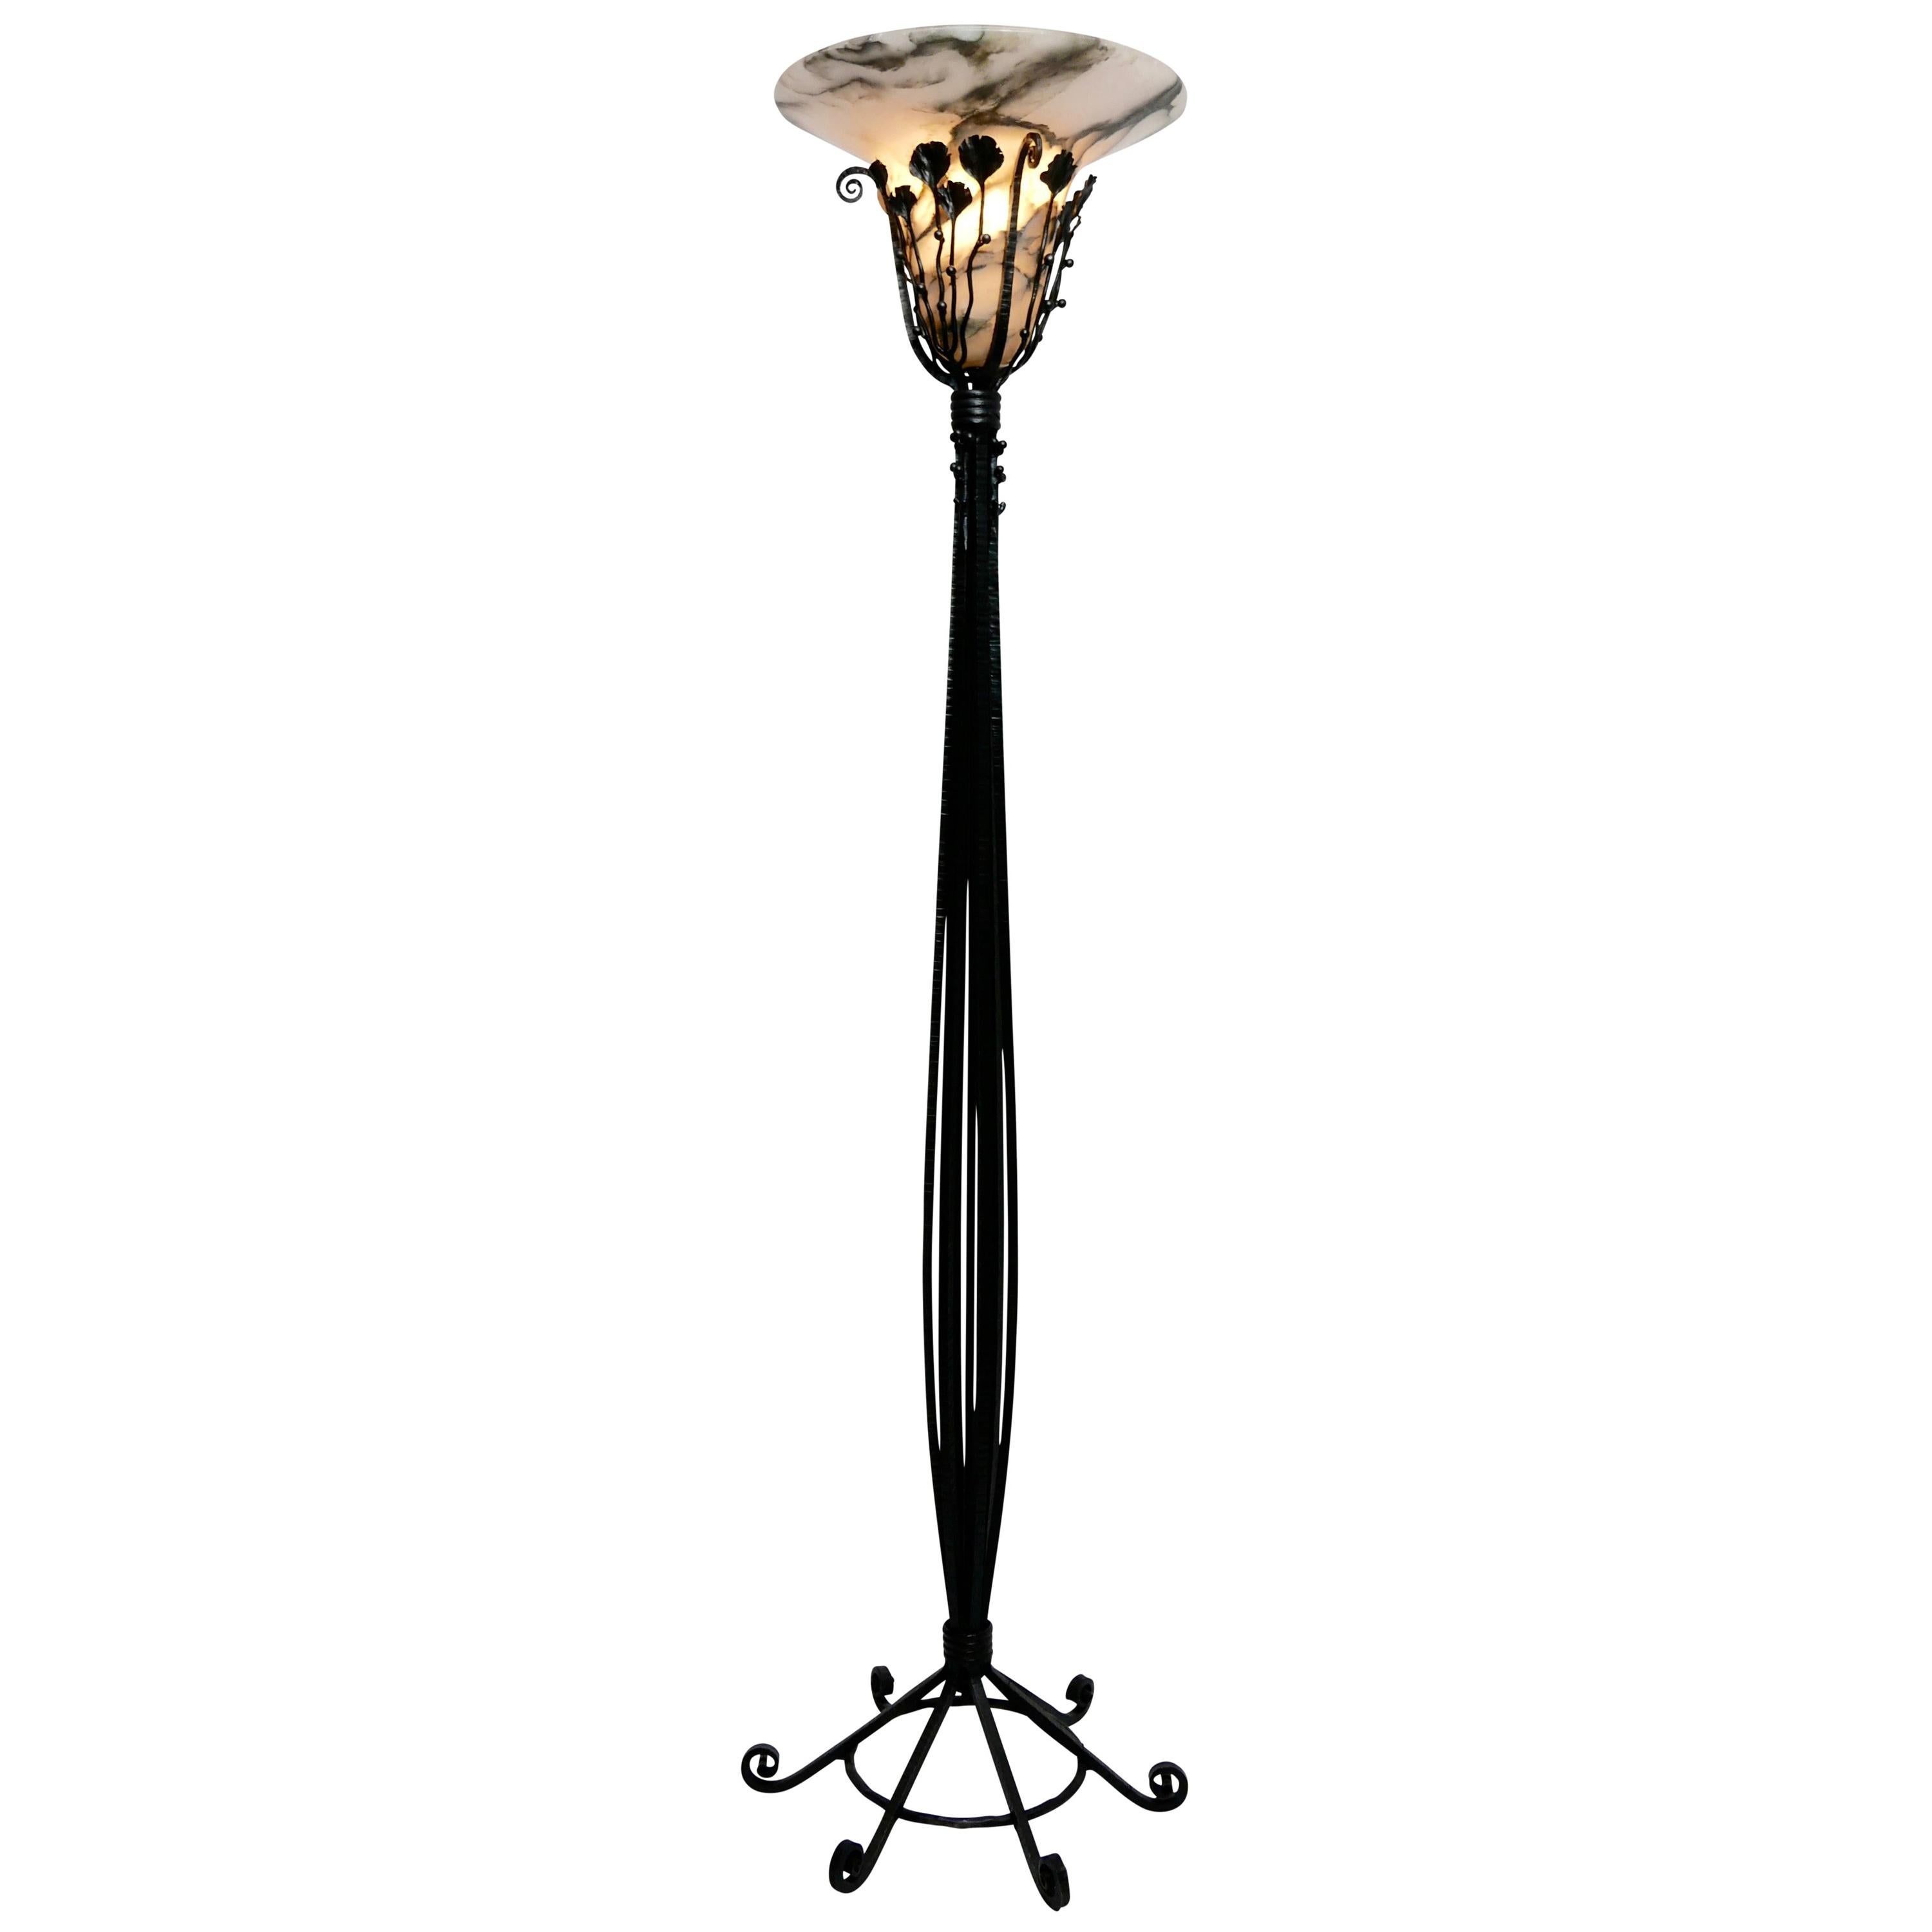 Art Deco Wrought Iron Floor Lamp with Alabaster Shade, French, circa 1920